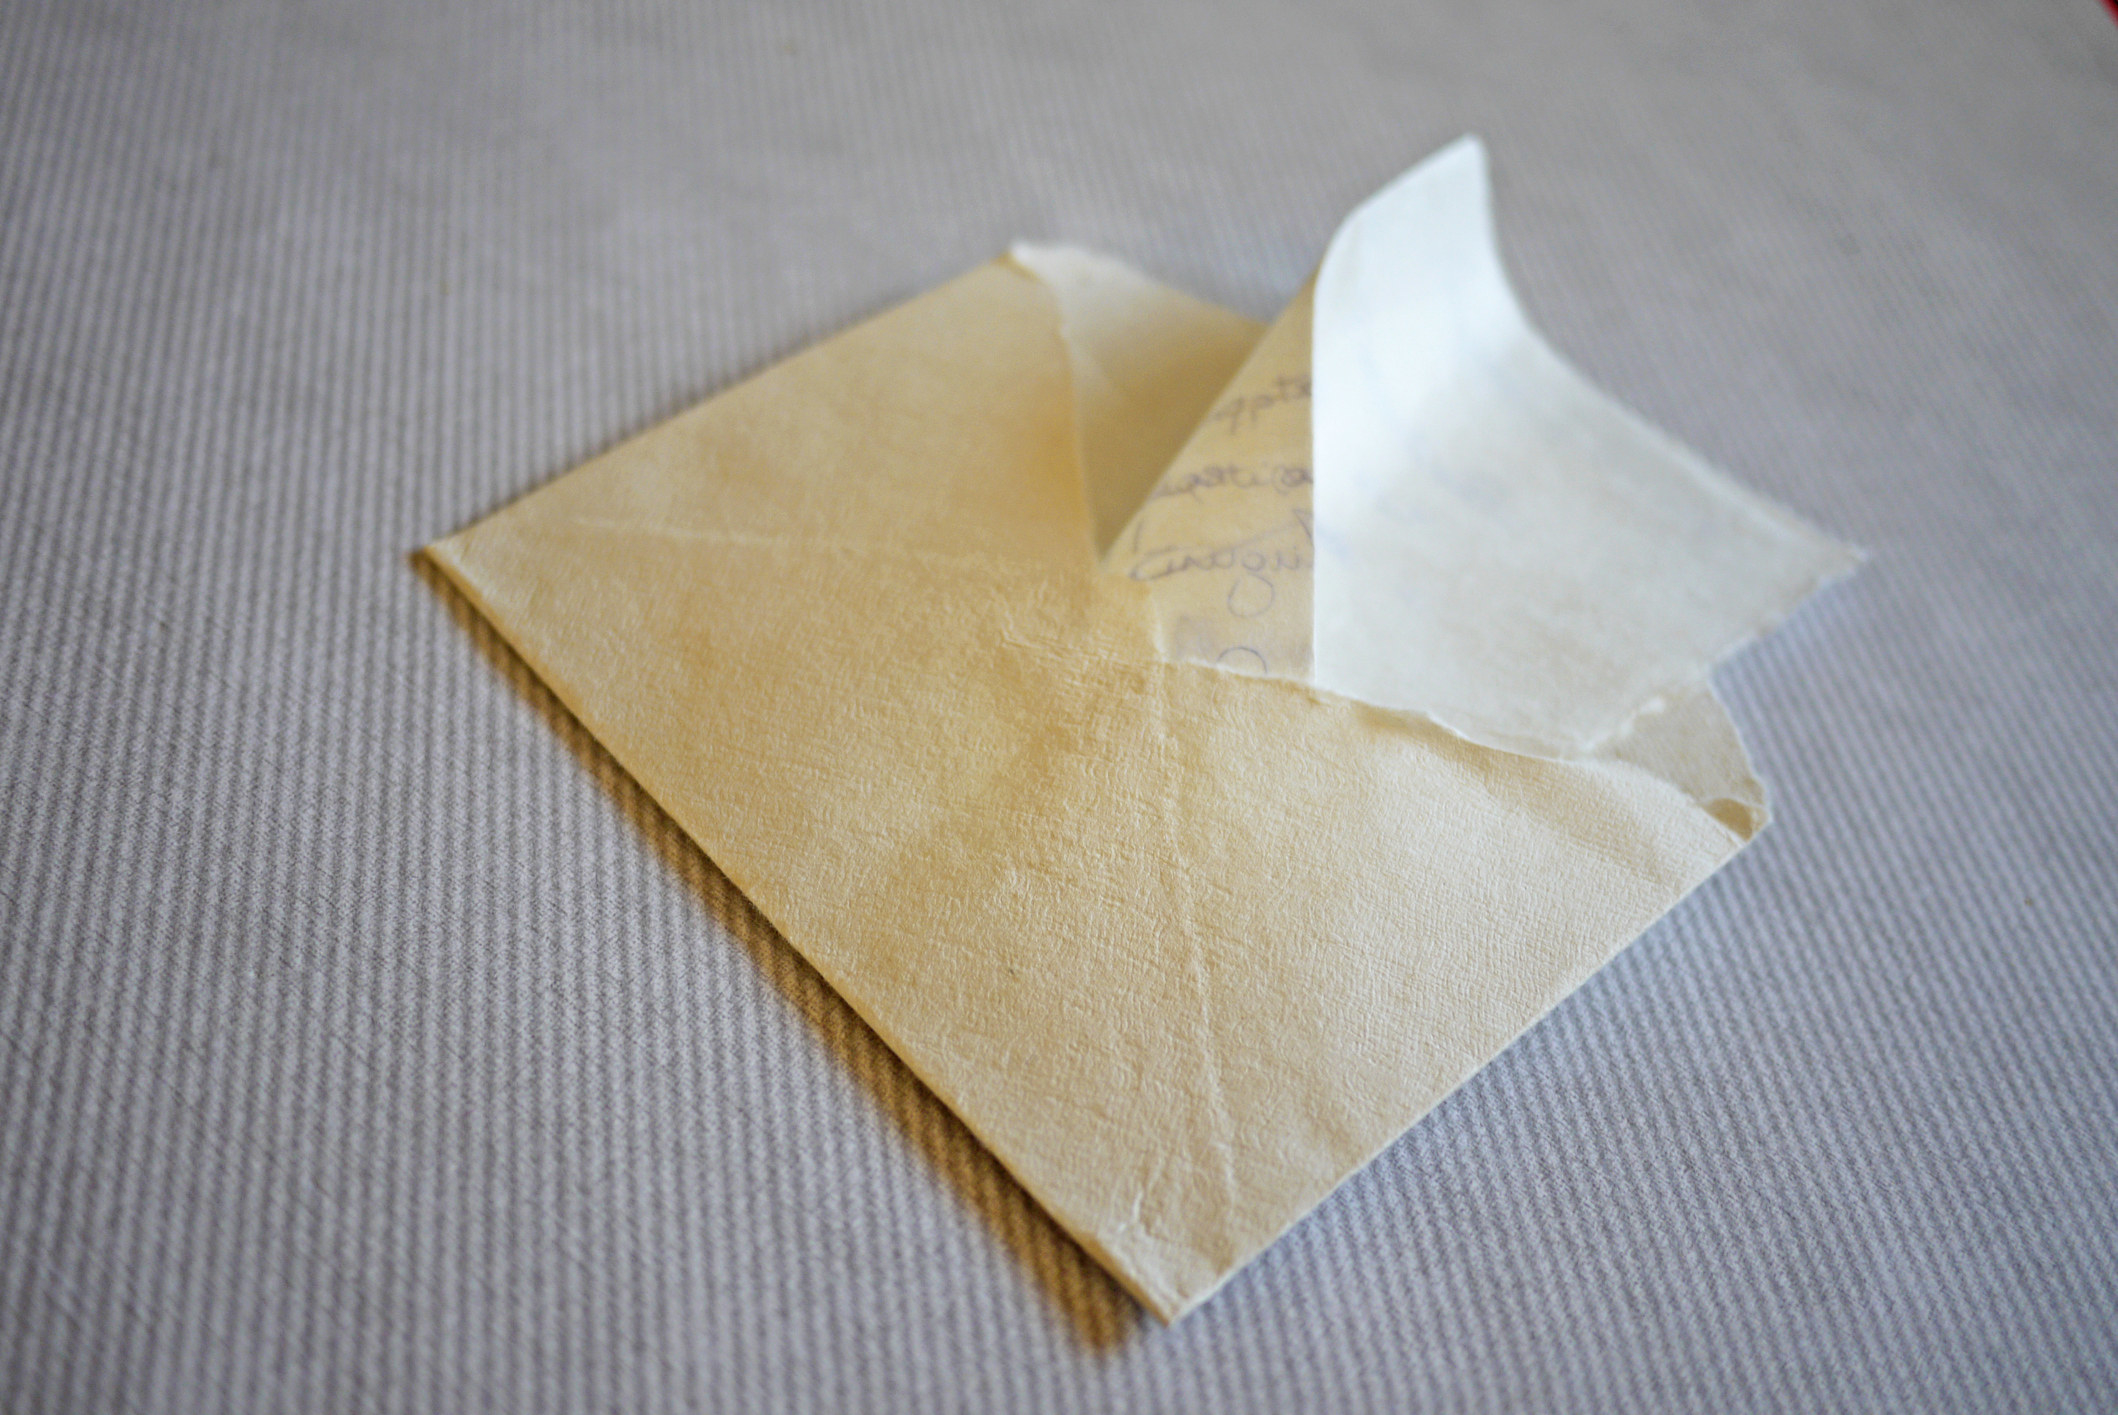 A letter in an envelope